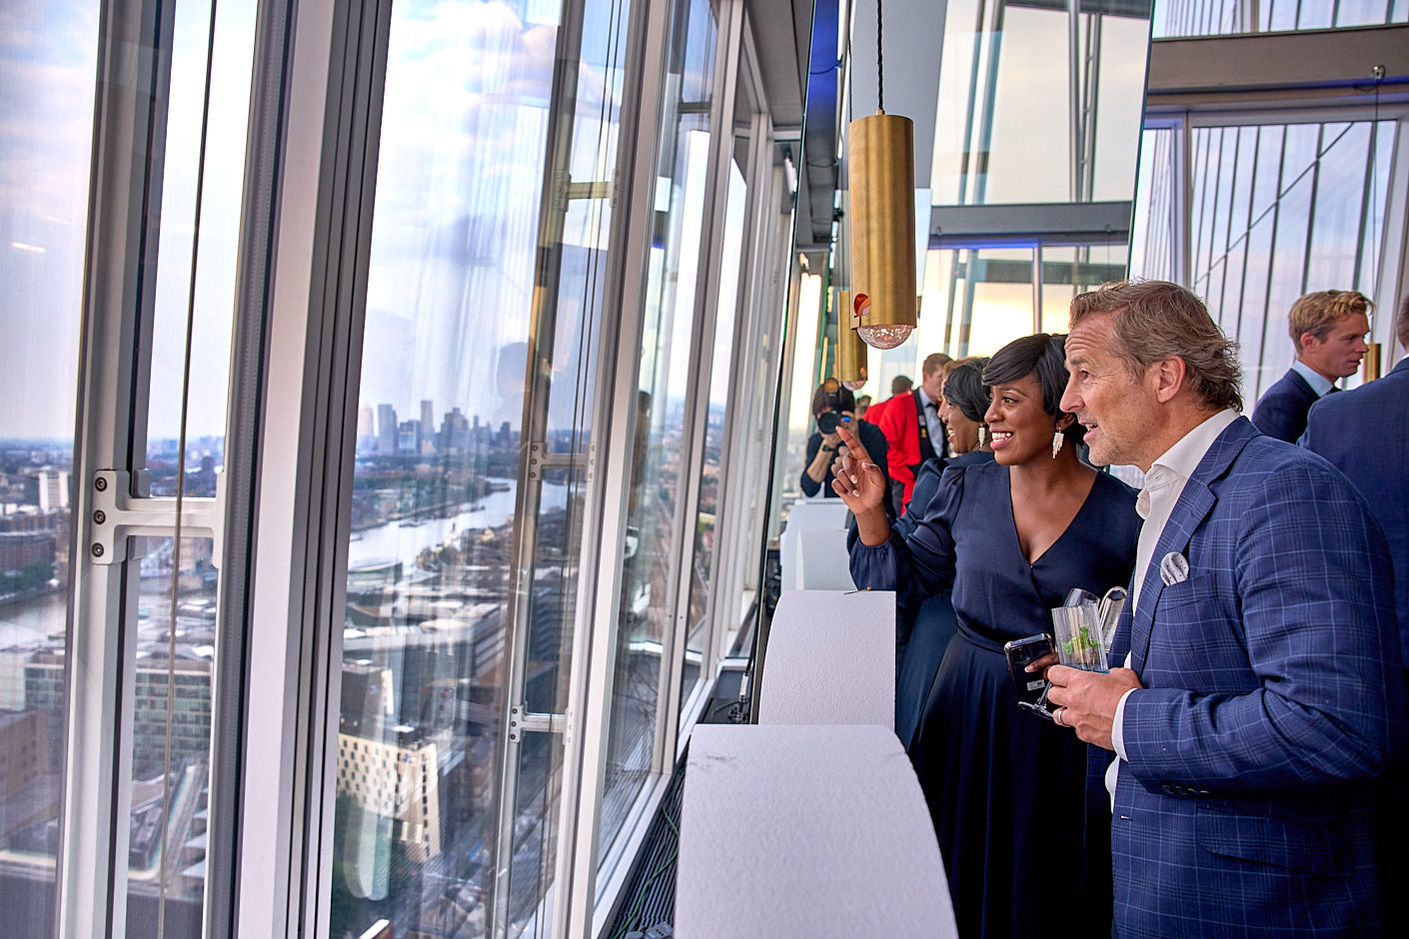 Corporate awards ceremony photography at The Shard by photographer Josh Caius